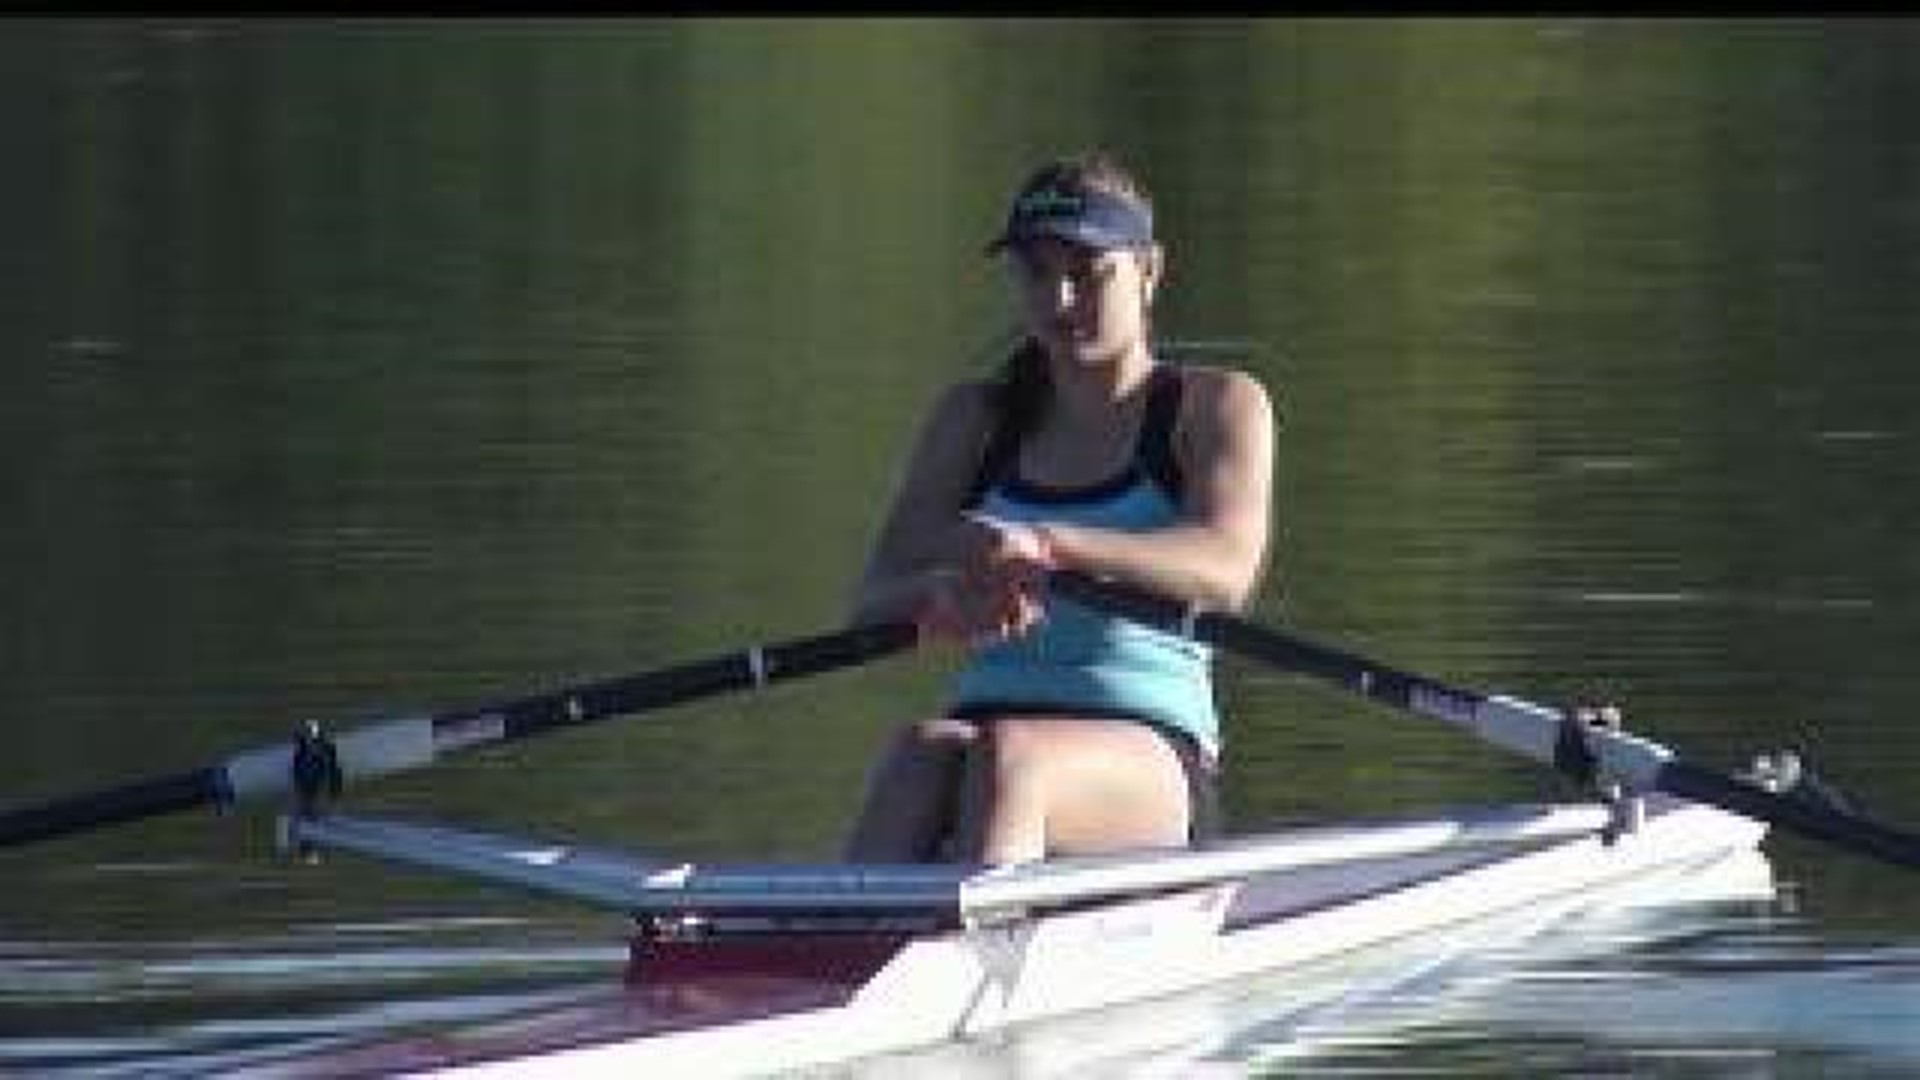 Rower says you get out of the sport what you put in